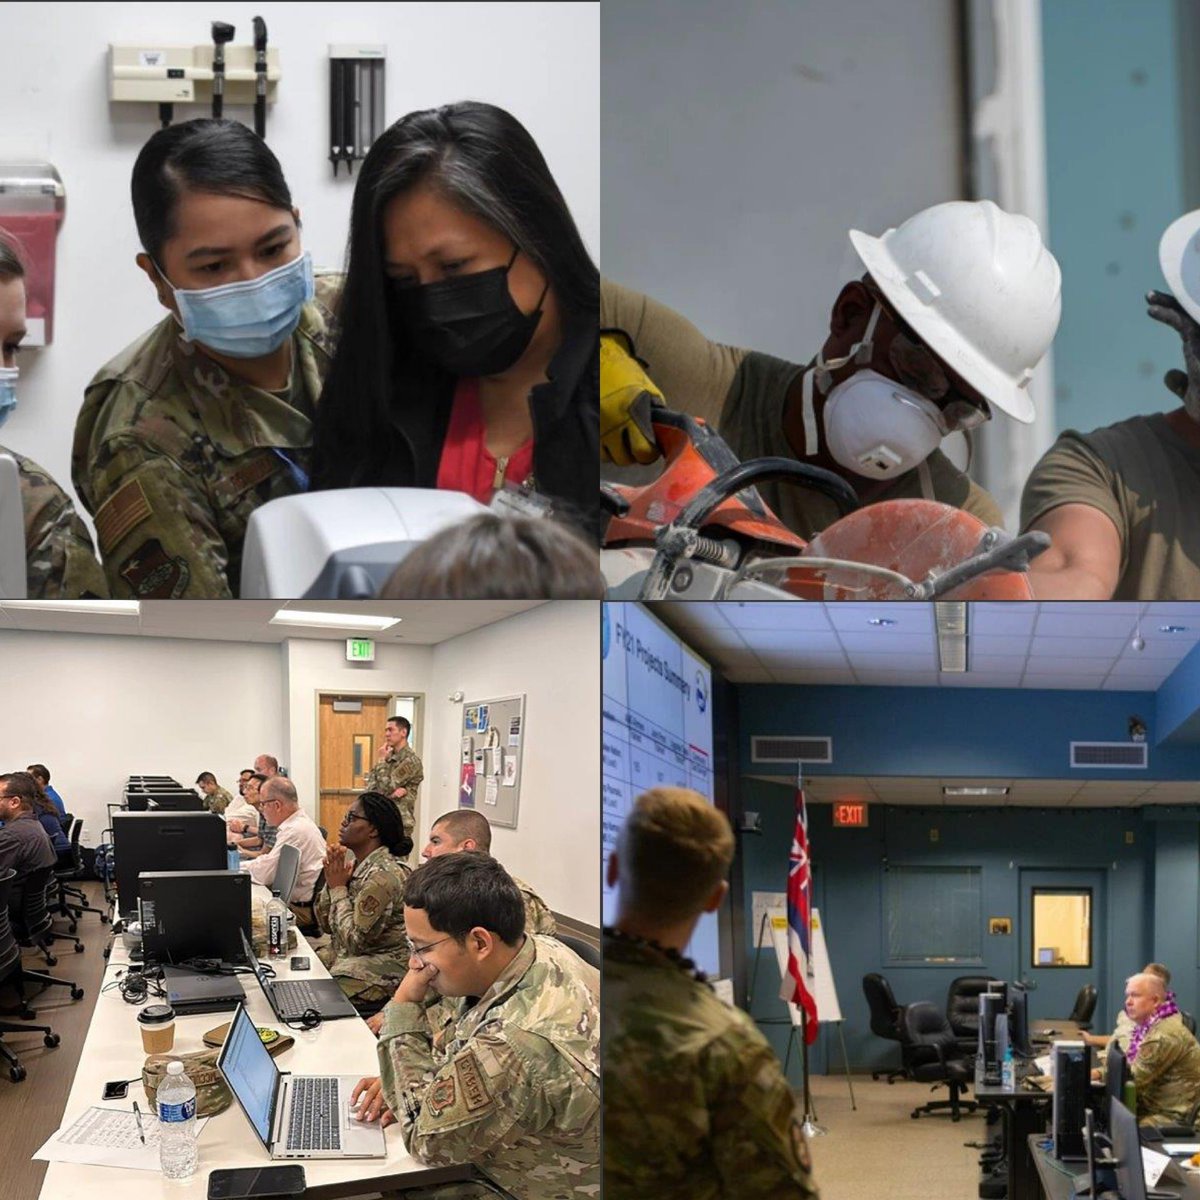 #Checkout our #IRT December newsletter reflecting back on the amazing accomplishments of the Joint Services during FY23 in completing mission essential training requirements while simultaneously delivering incidental benefit to American communities. irt.defense.gov/Portals/57/Doc…